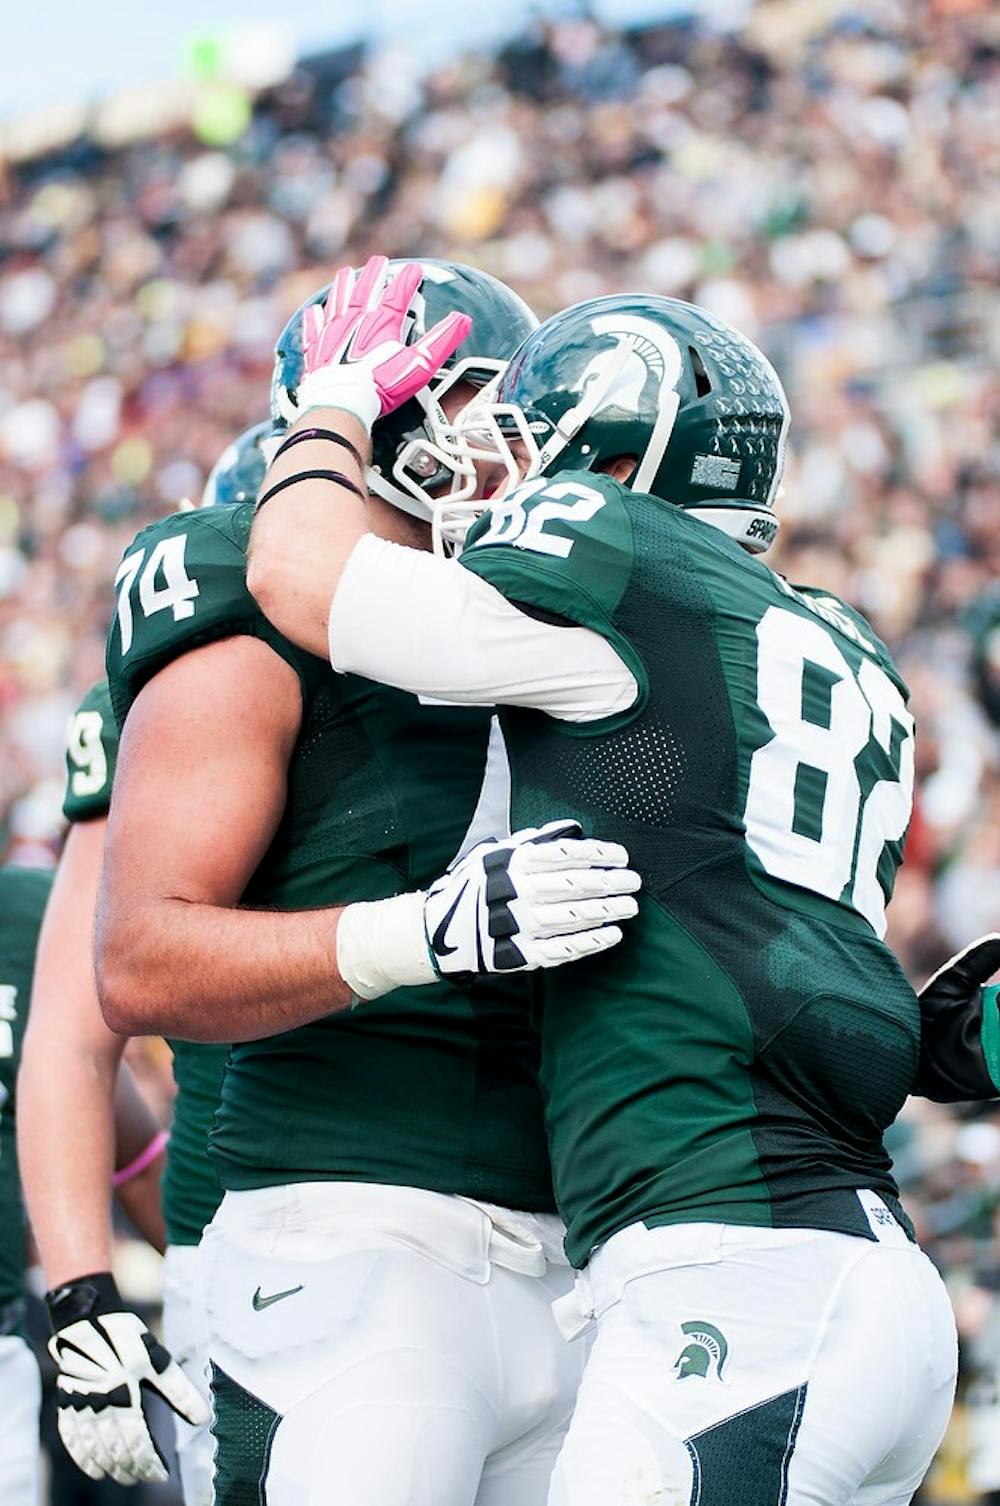 <p>Sophomore tight end Josiah Price celebrates with sophomore offensive tackle Jack Conklin Saturday during a game against Purdue at Ross-Ade Stadium. The Spartans defeated the Boilermakers,  45-31. Photo courtesy of Purdue Exponent/Mujtabaa Hasan</p>